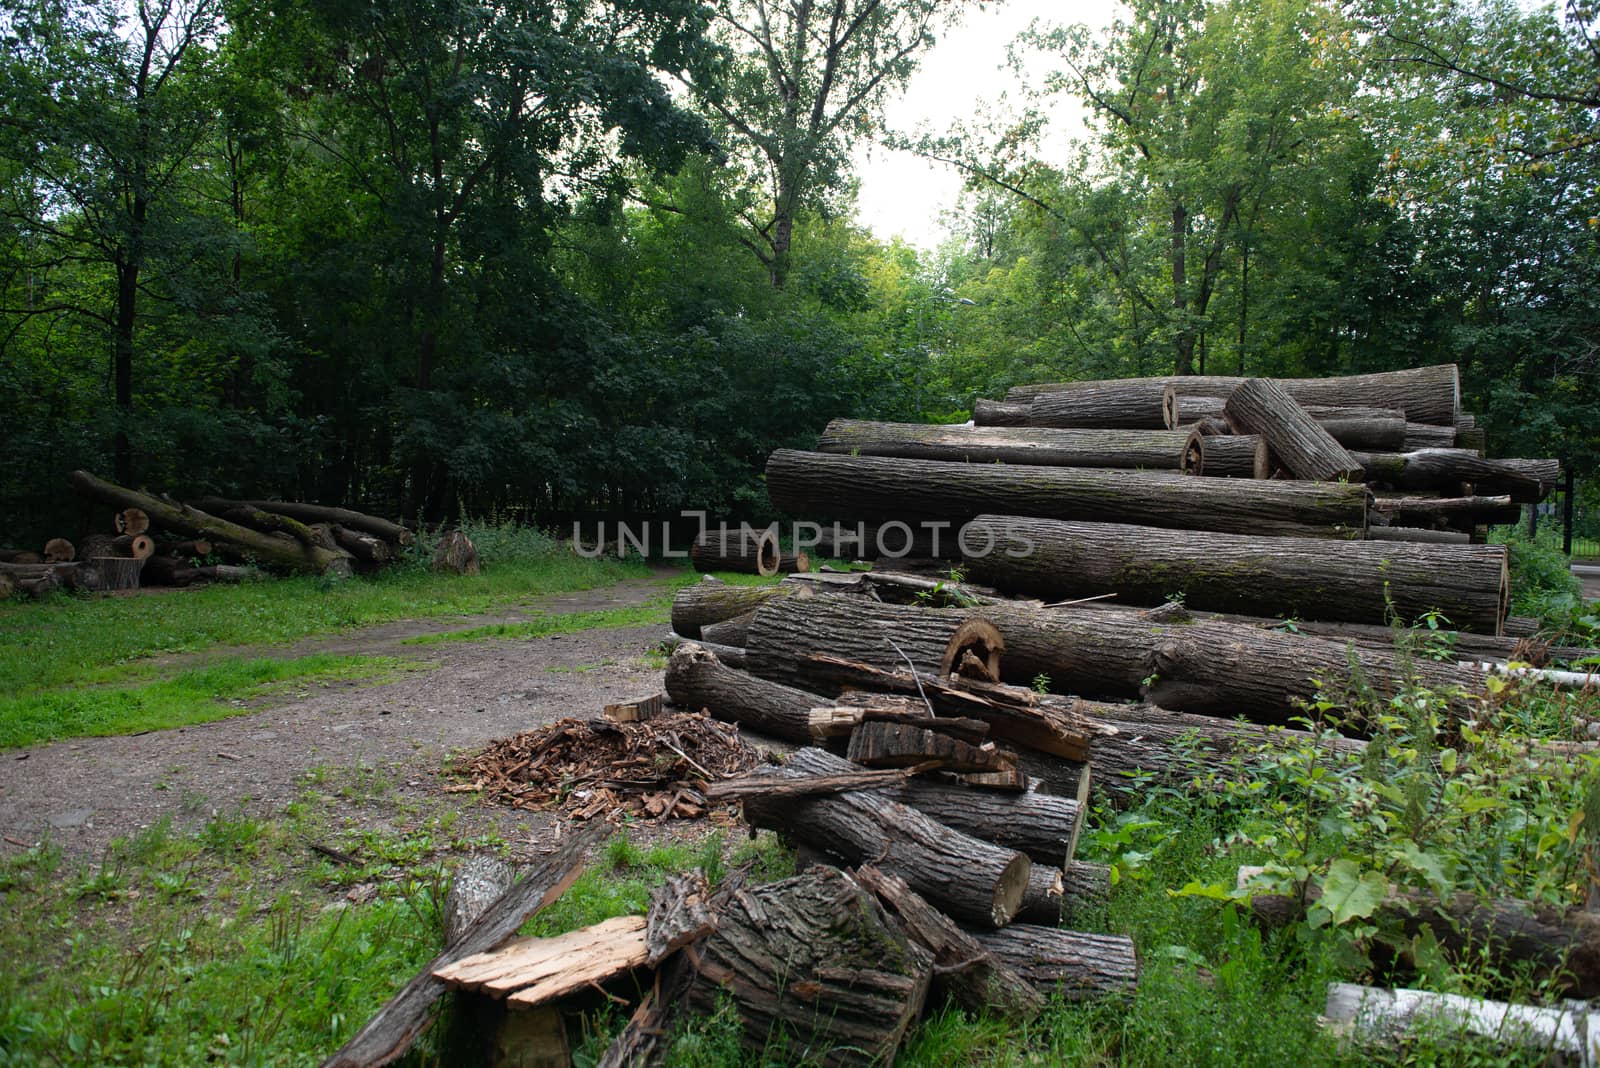 Wooden natural cut logs textured in a park